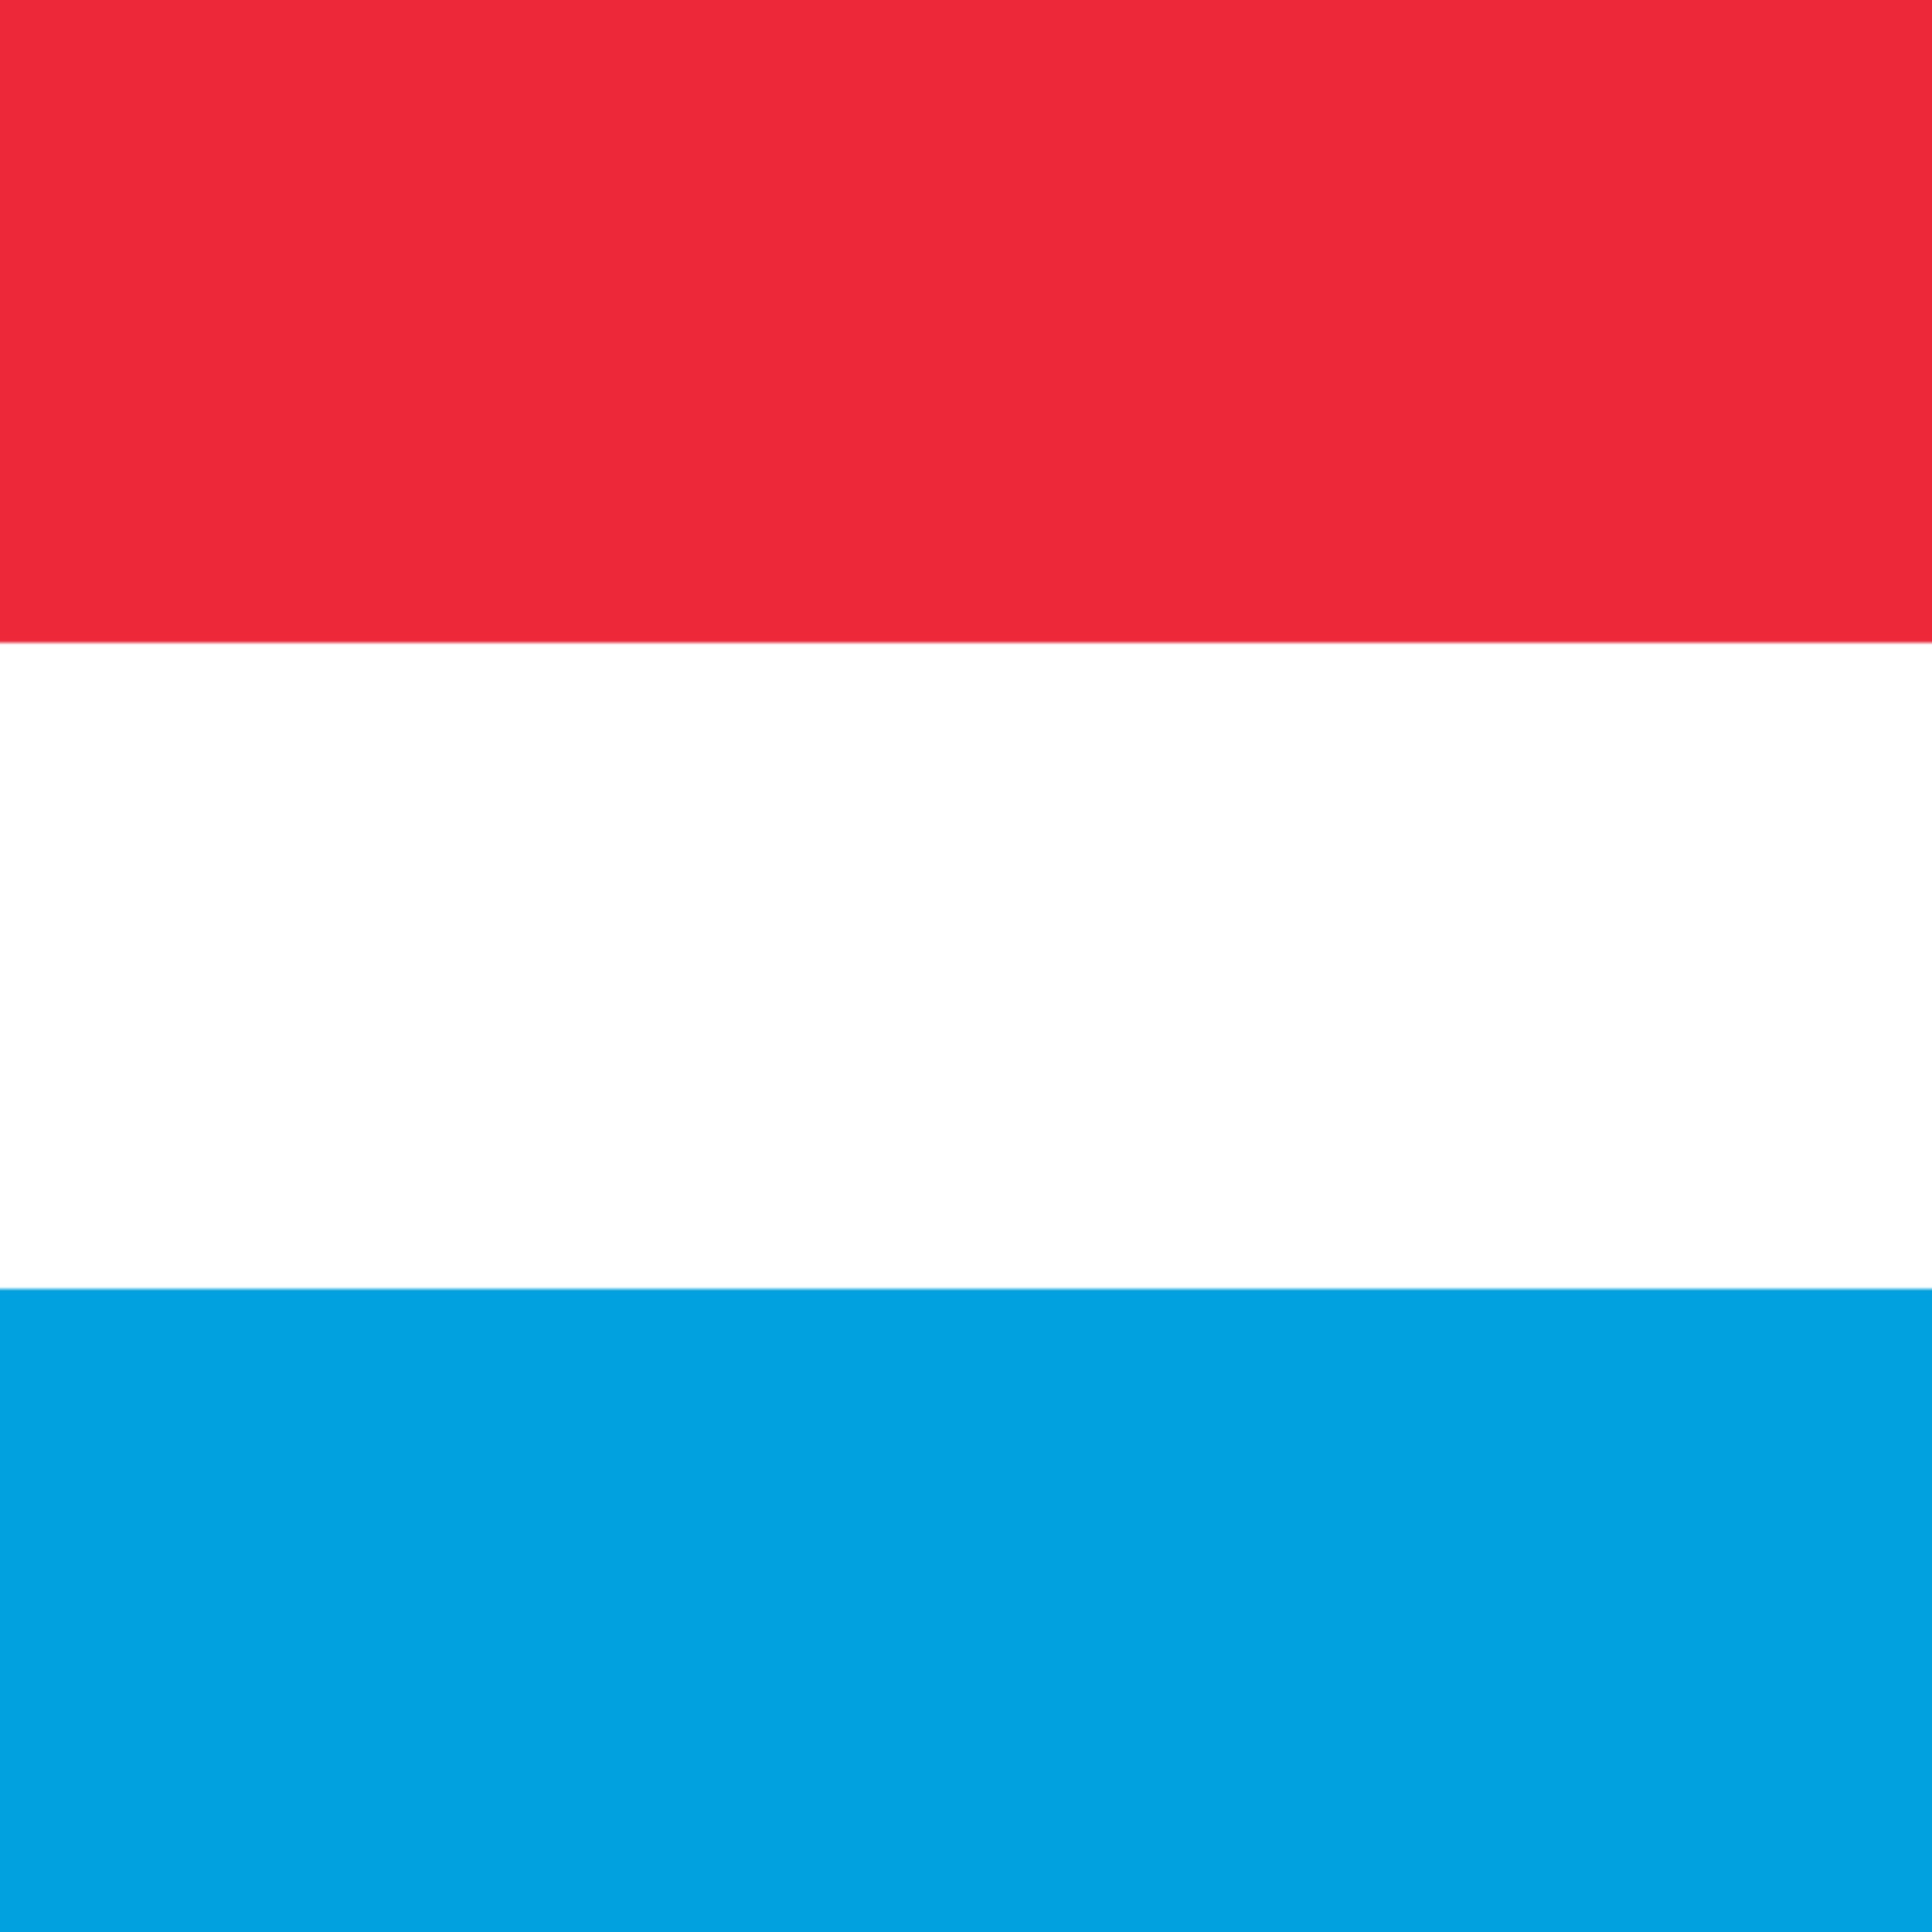 Honorary Consulate of Luxembourg (Alicante) 